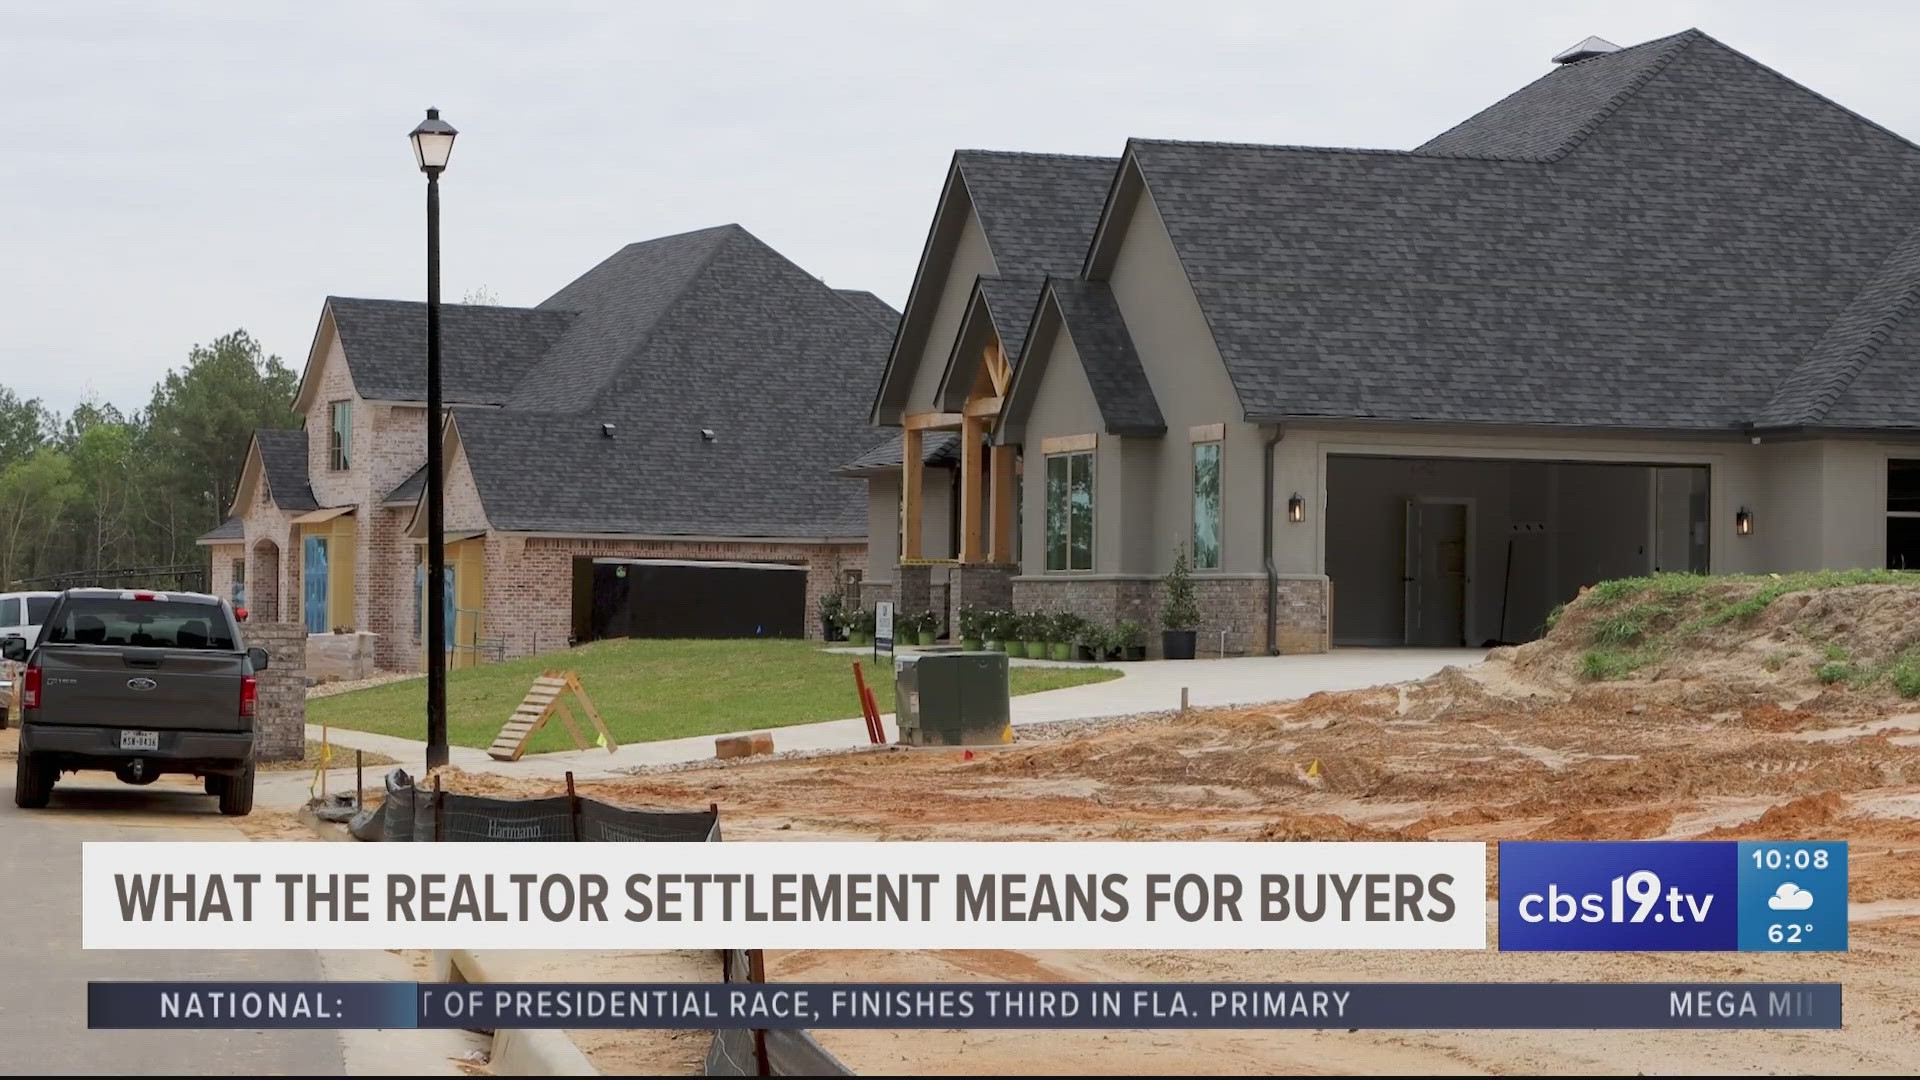 Tyler realtor reacts to National Association of Realtors announcement of possible changes coming to homebuying process